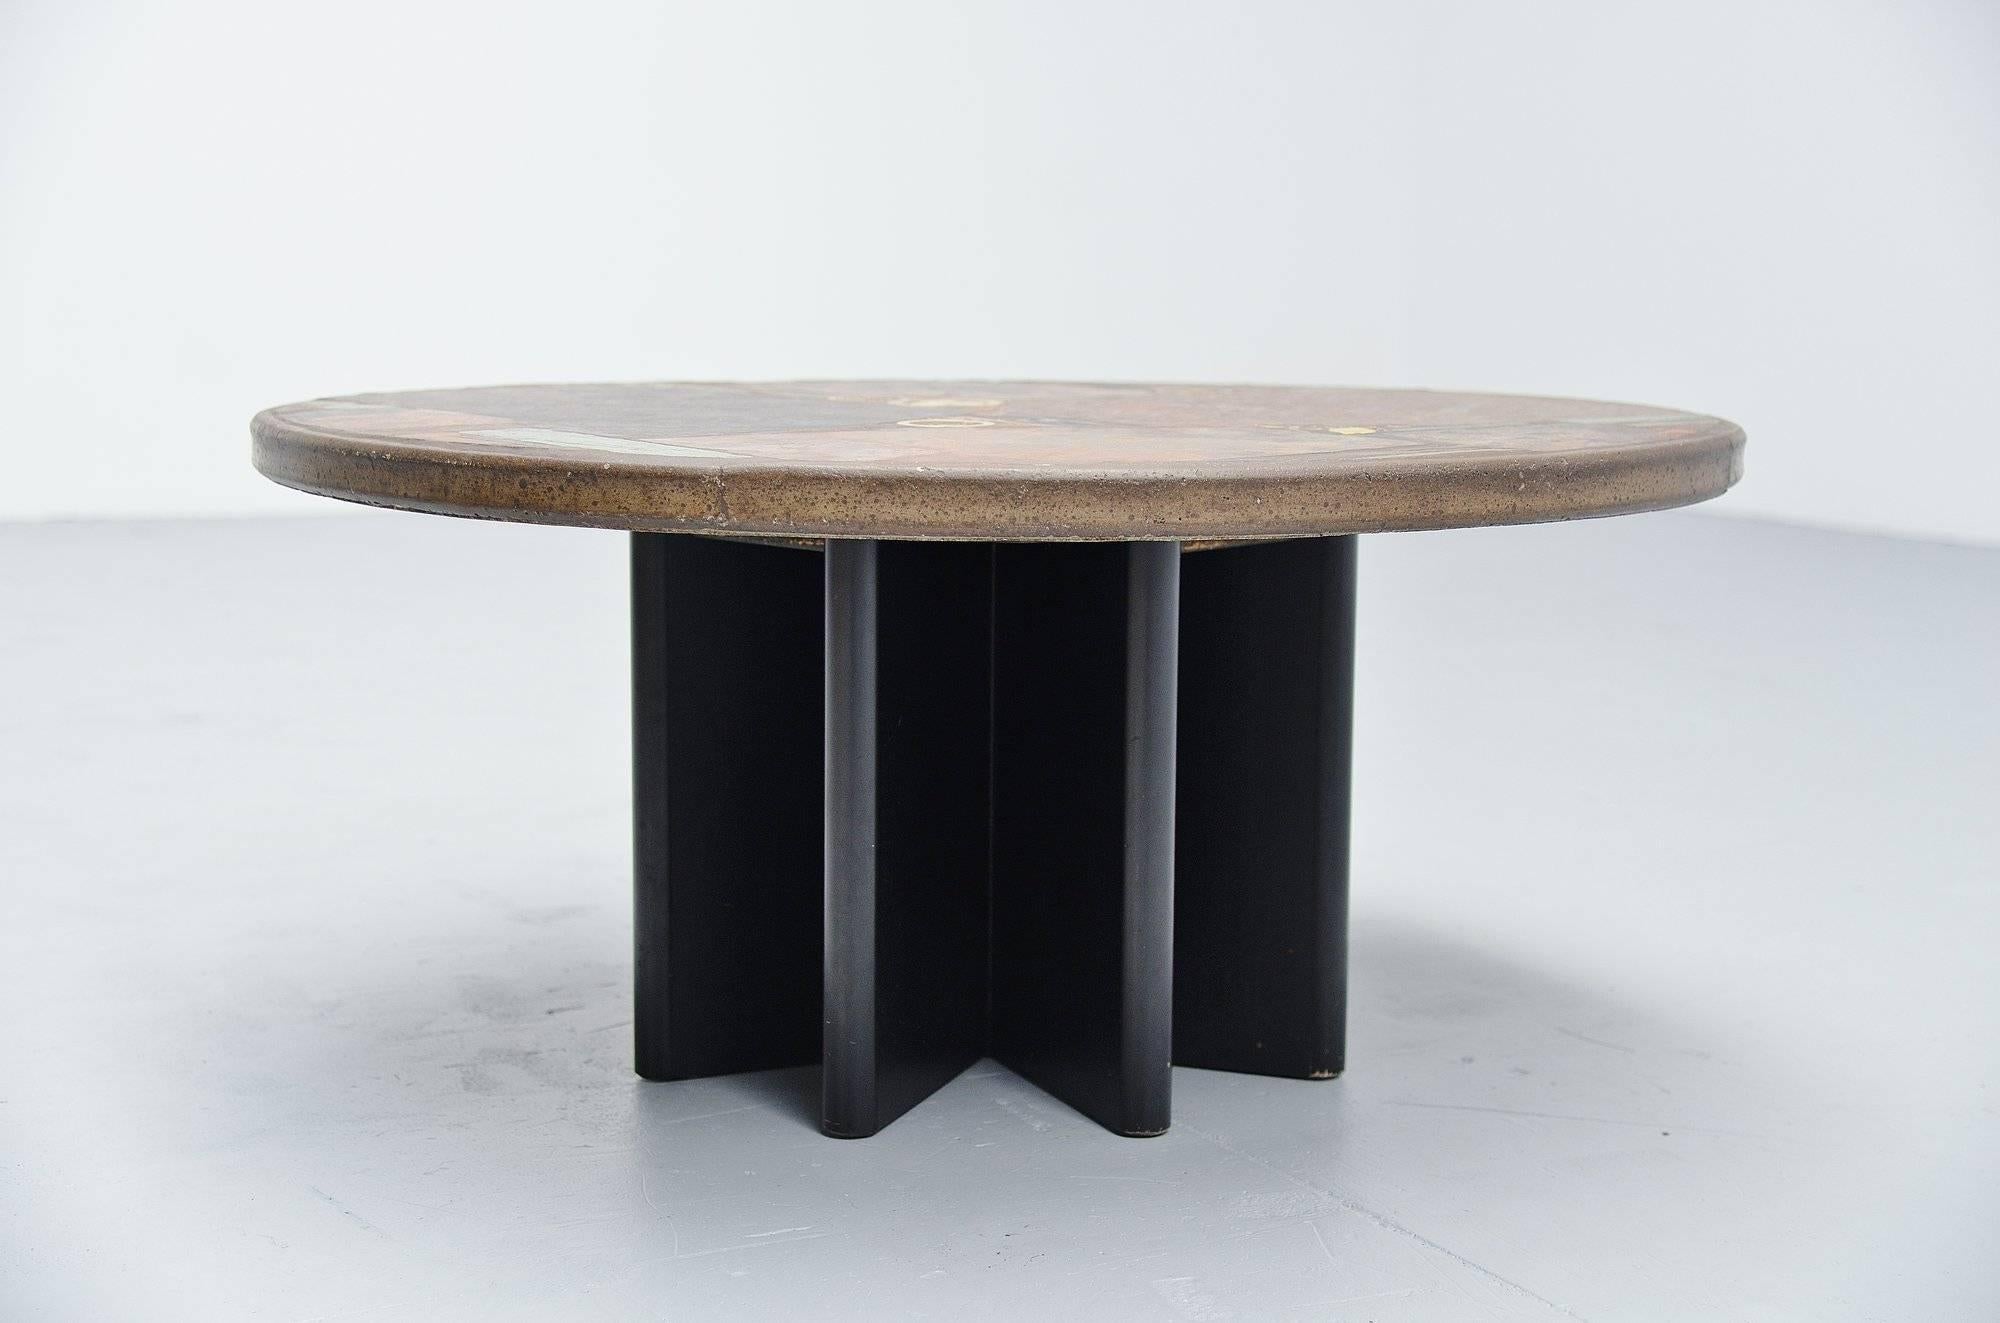 Very nice one off round shaped coffee table designed and made by Marcus Kingma, Holland, 1981. Marcus was the brother of Paul Kingma who started making these tables in the 1960s. Marcus helped Paul making table at the end of his career and